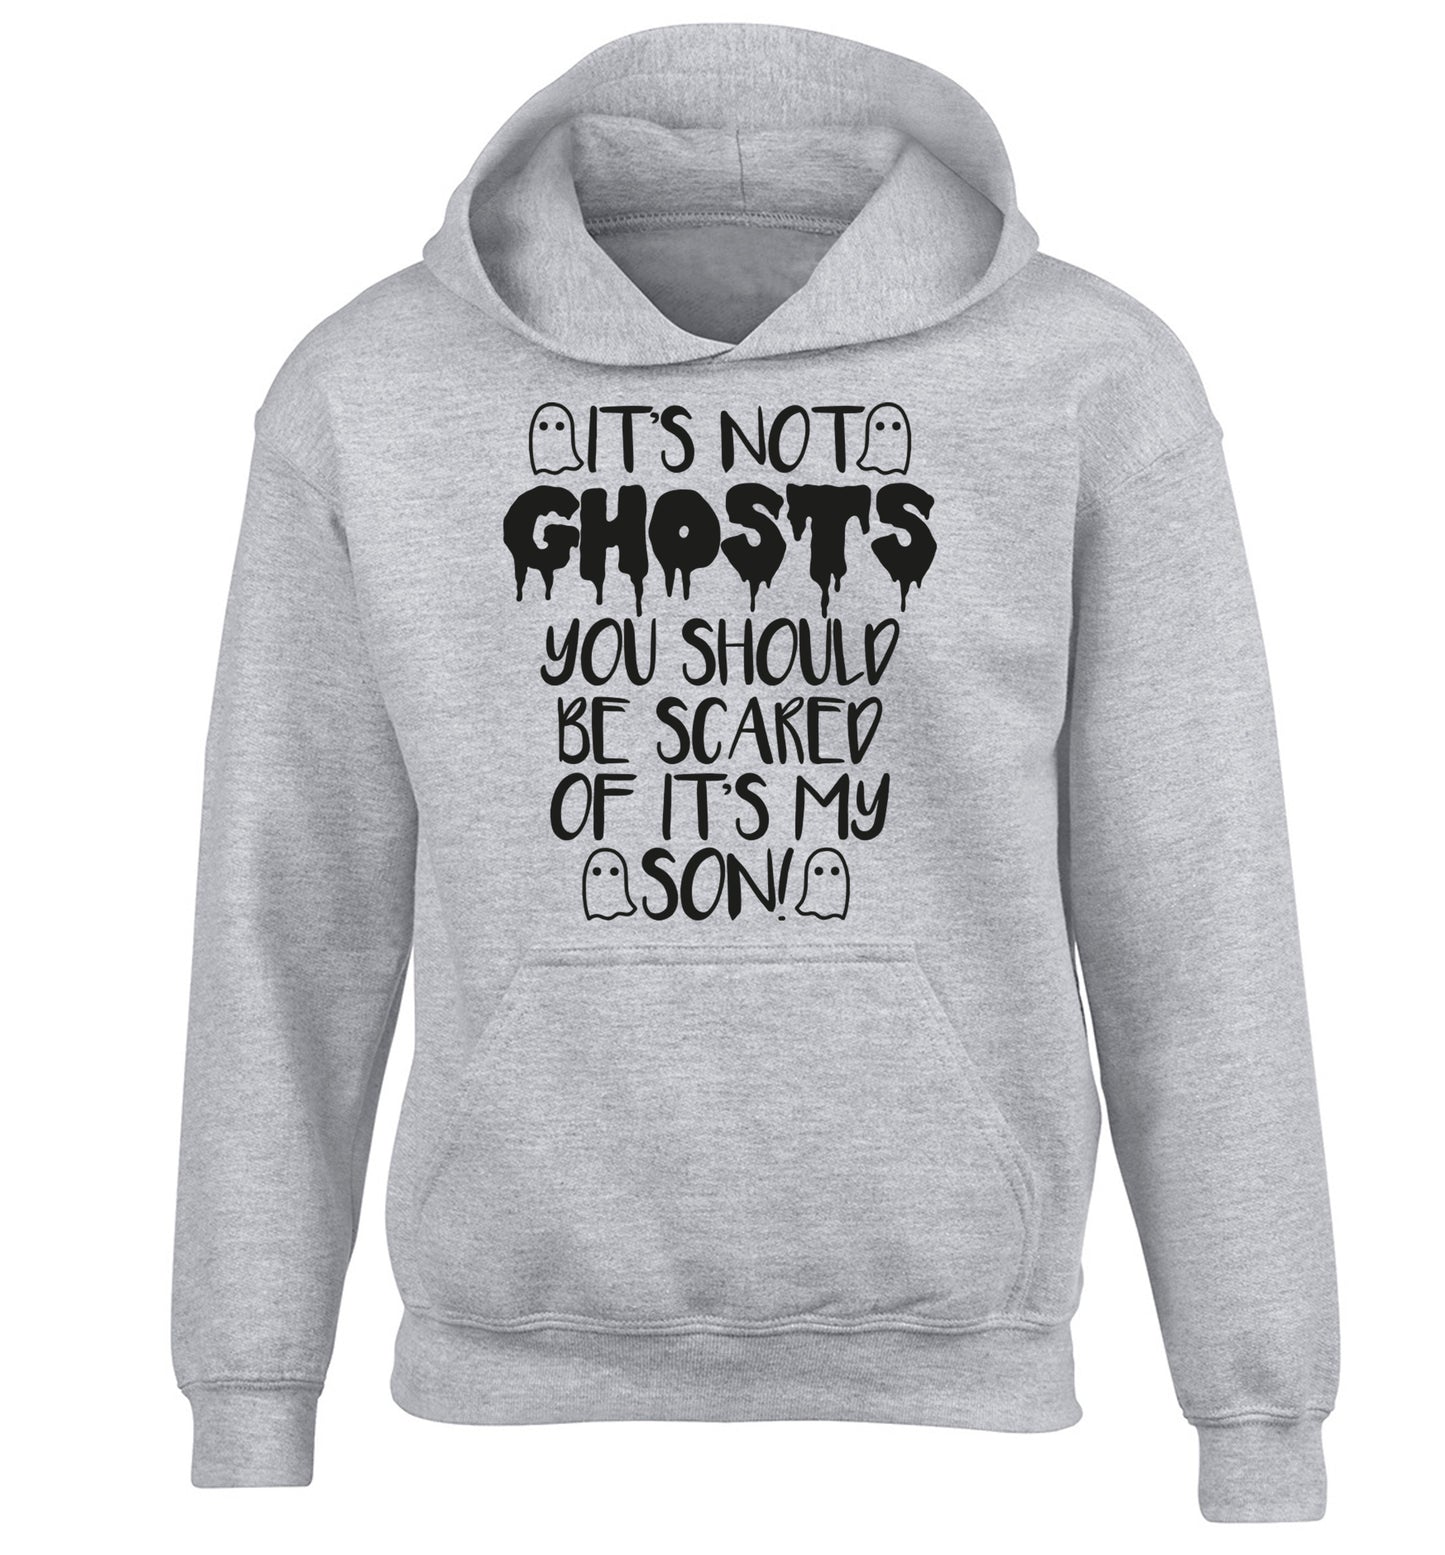 It's not ghosts you should be scared of it's my son! children's grey hoodie 12-14 Years